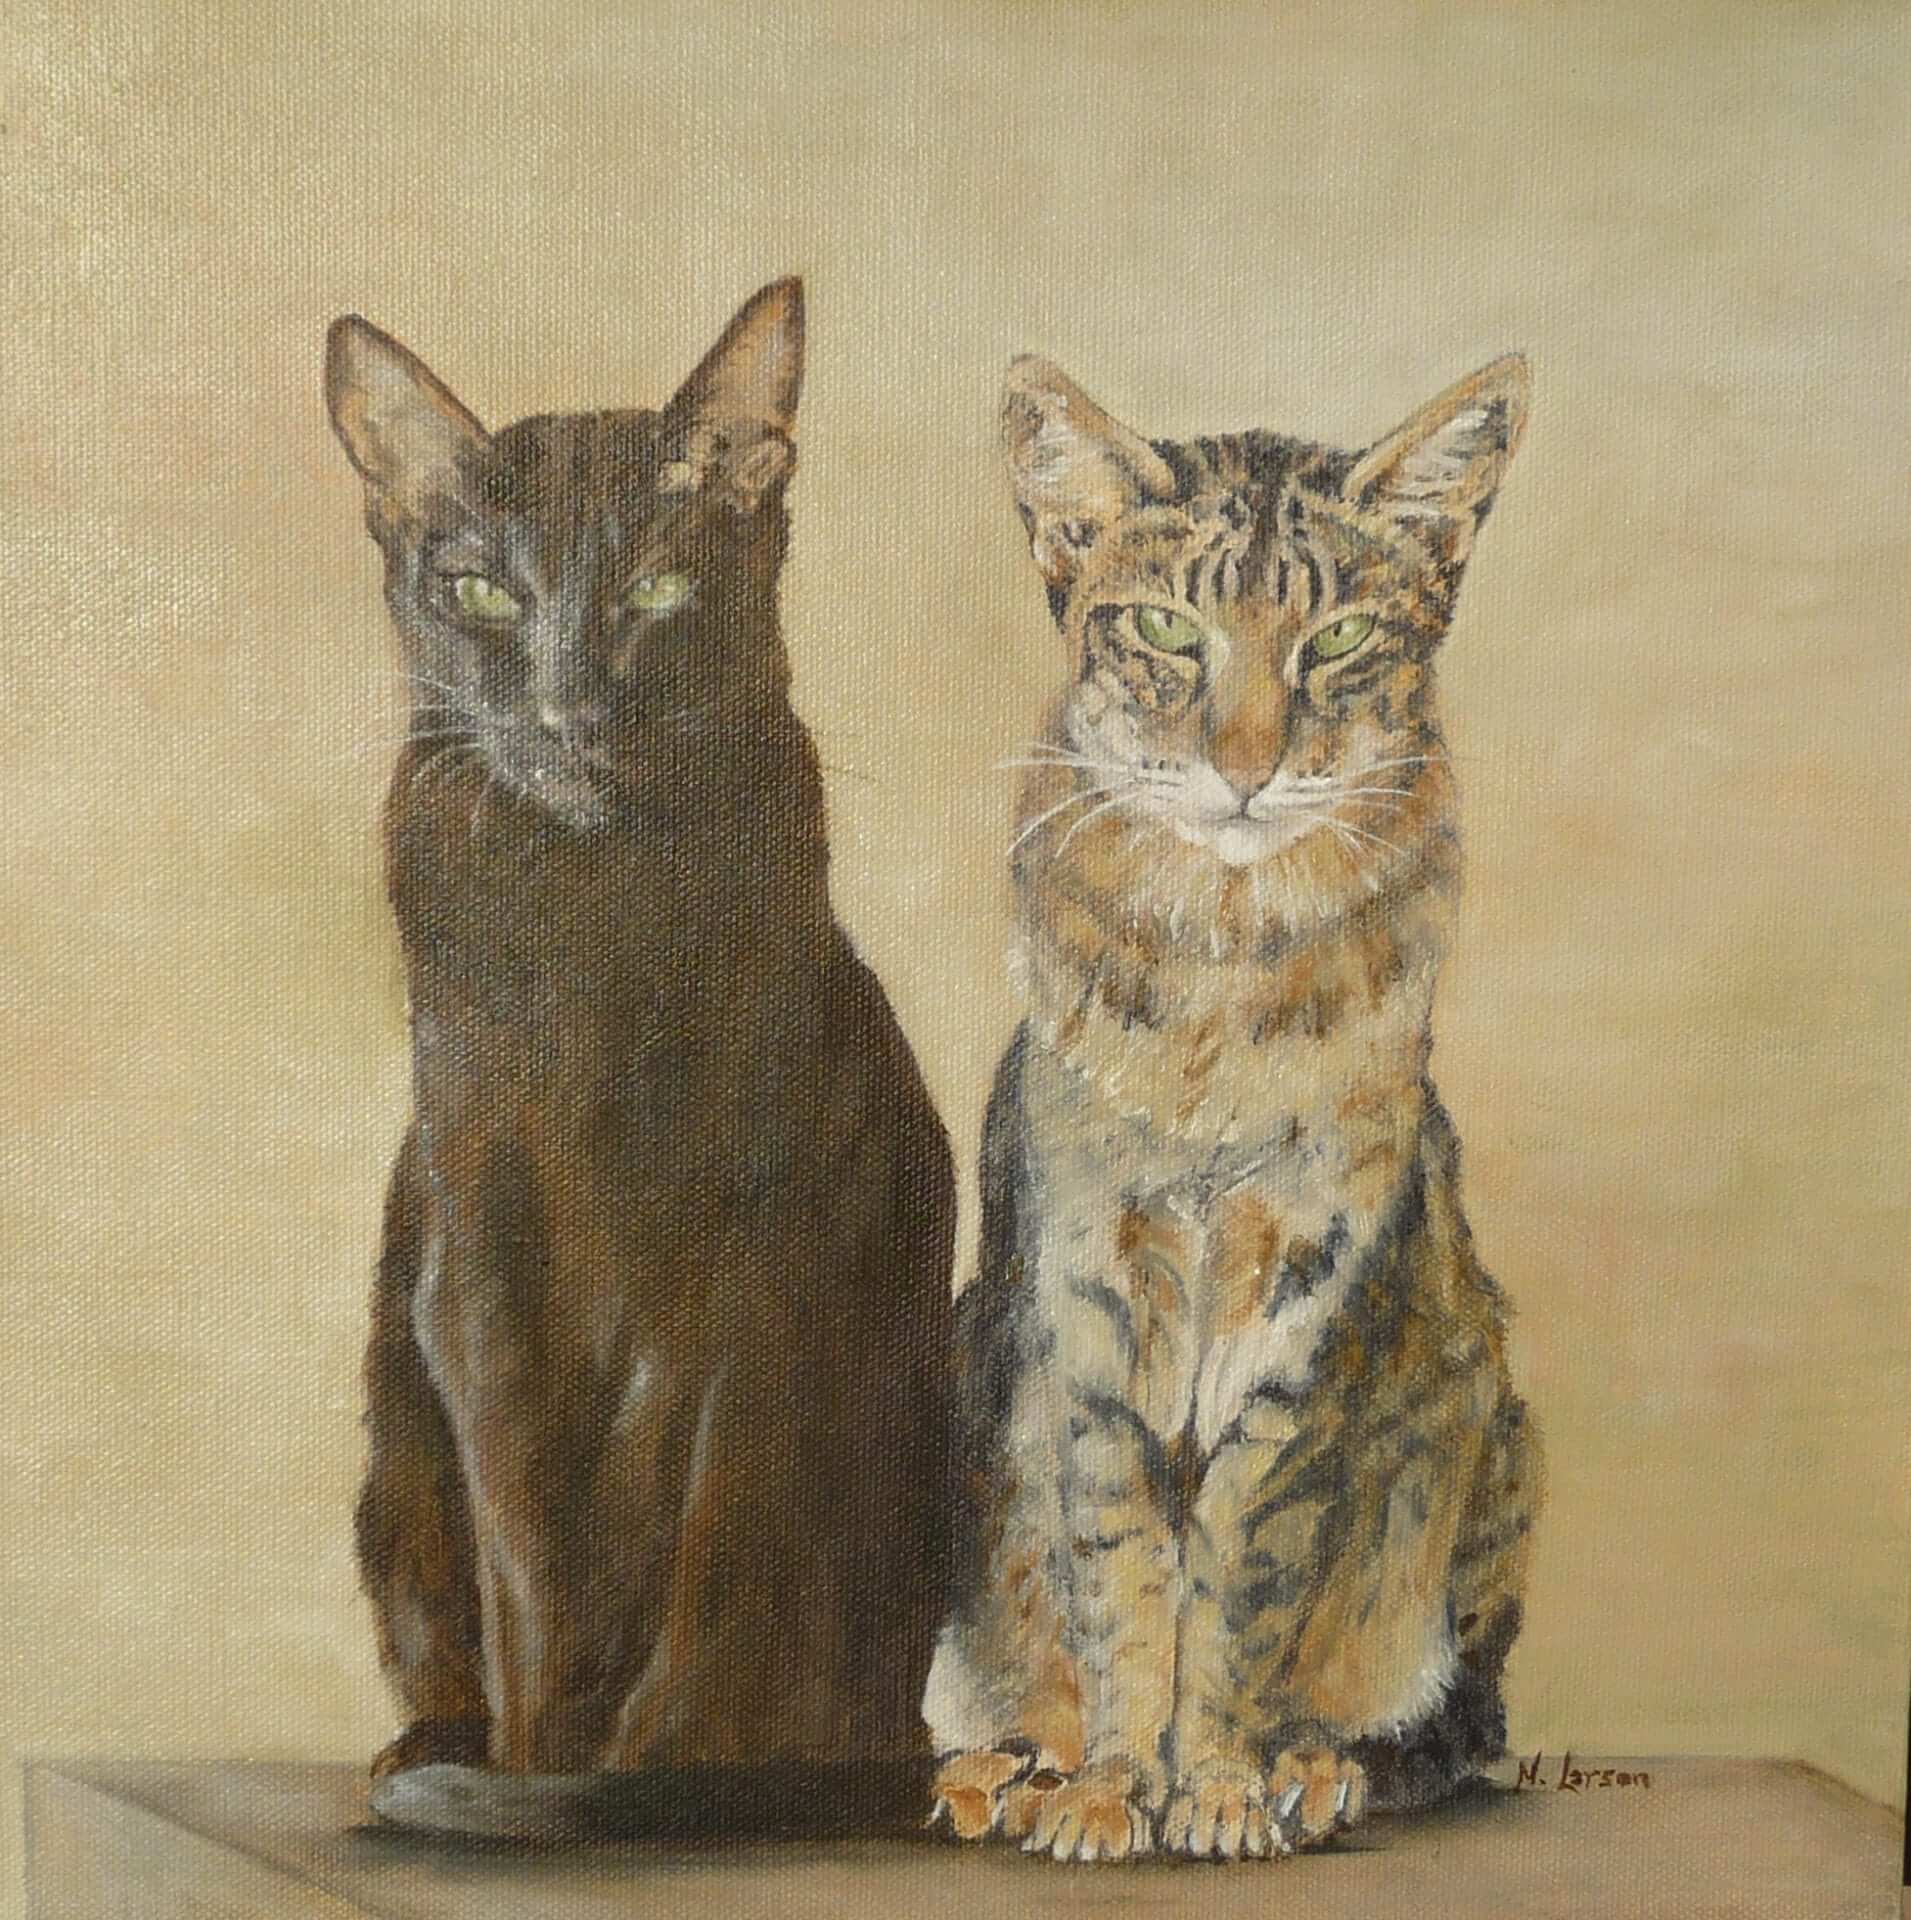 Painting of two cats in black and yellow color